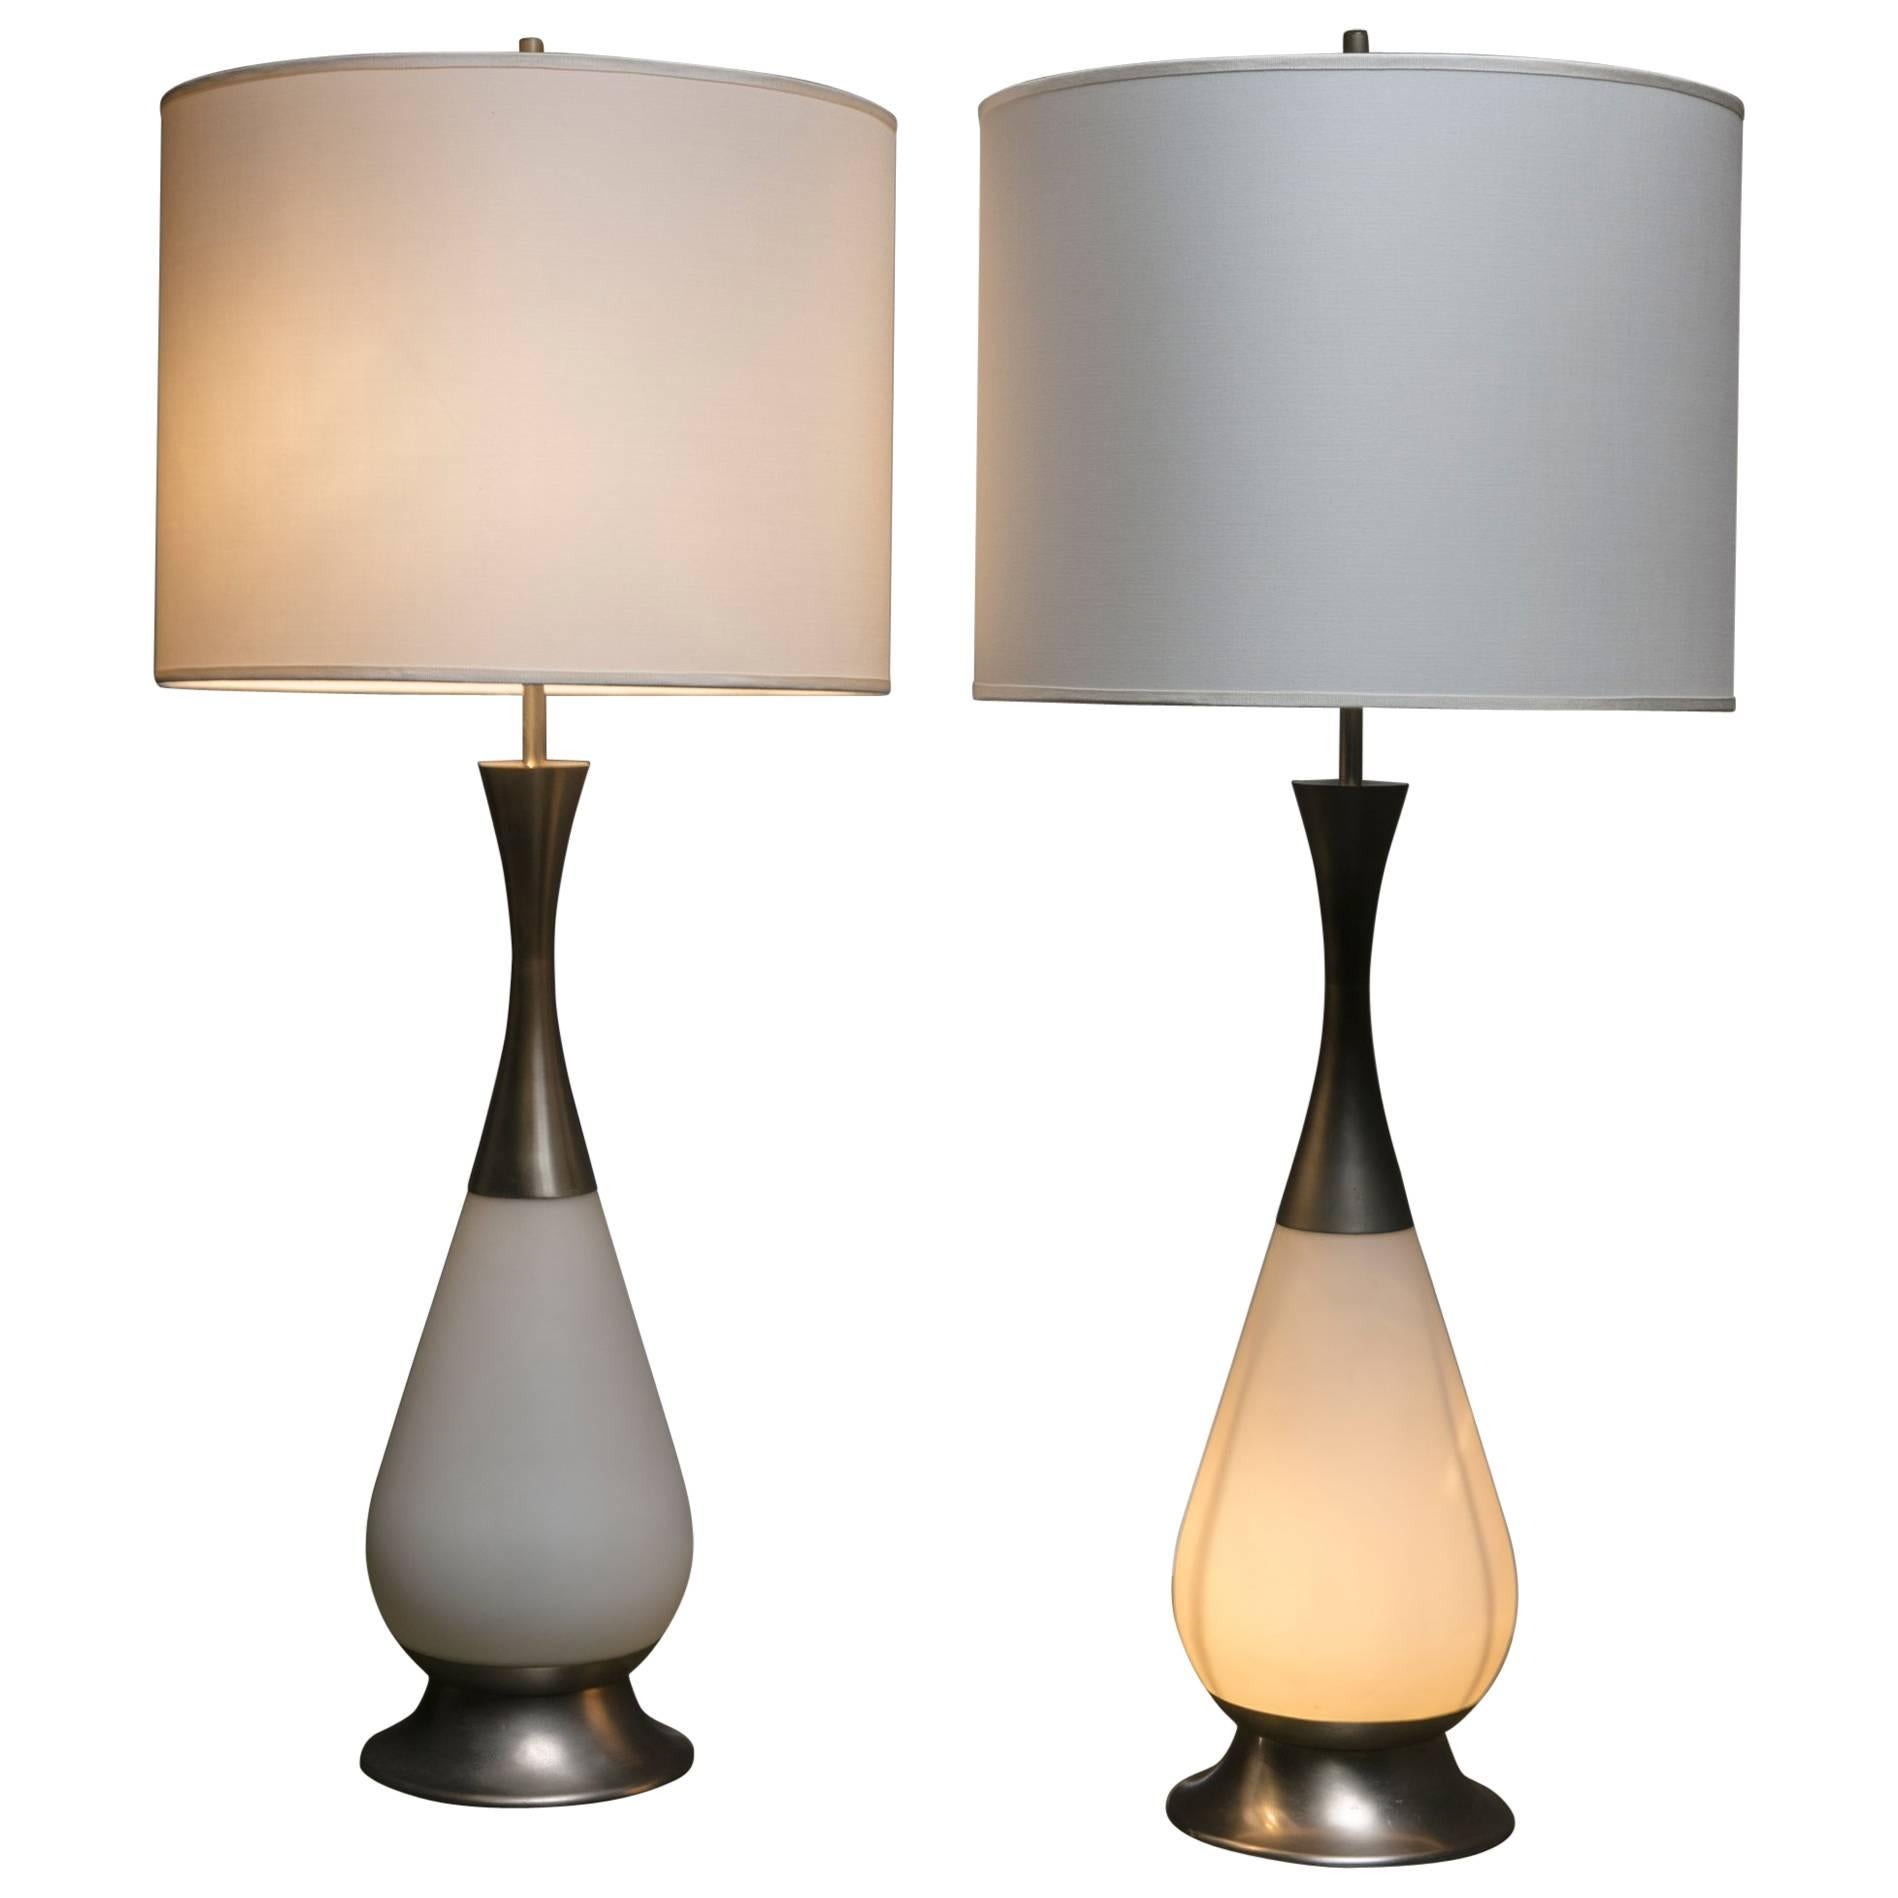 Marvellous Set of Two Stilnovo Table Lamps, Italy, 1960s For Sale